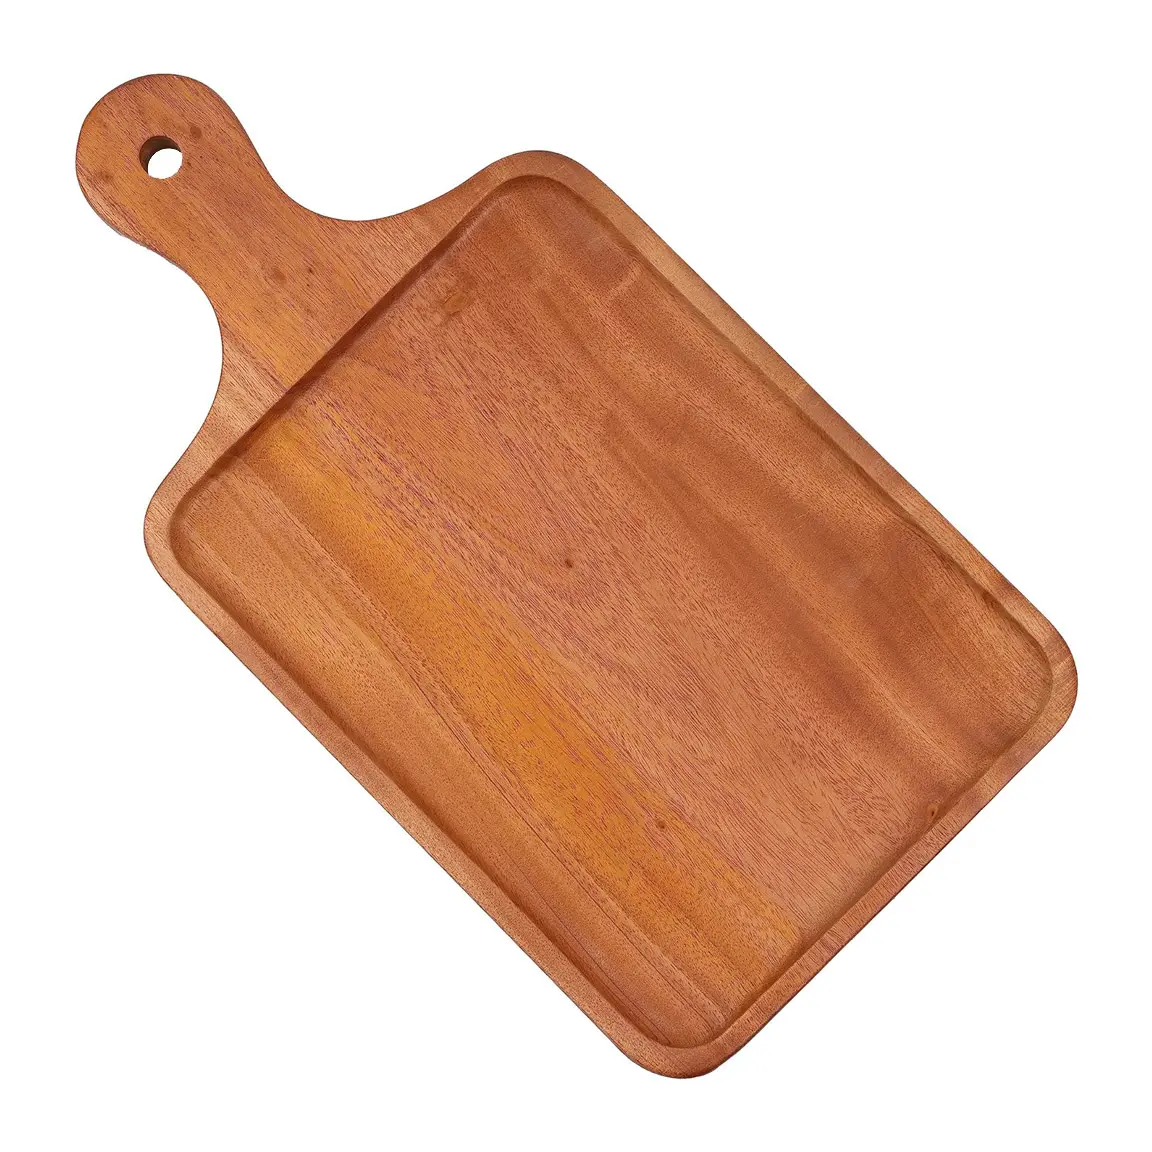 Hot Sale Wooden Serving Paddle with Handle Wood Large Serving Platter for Drinks Cupcakes Sushi BBQ Dinner Table Decor Trays